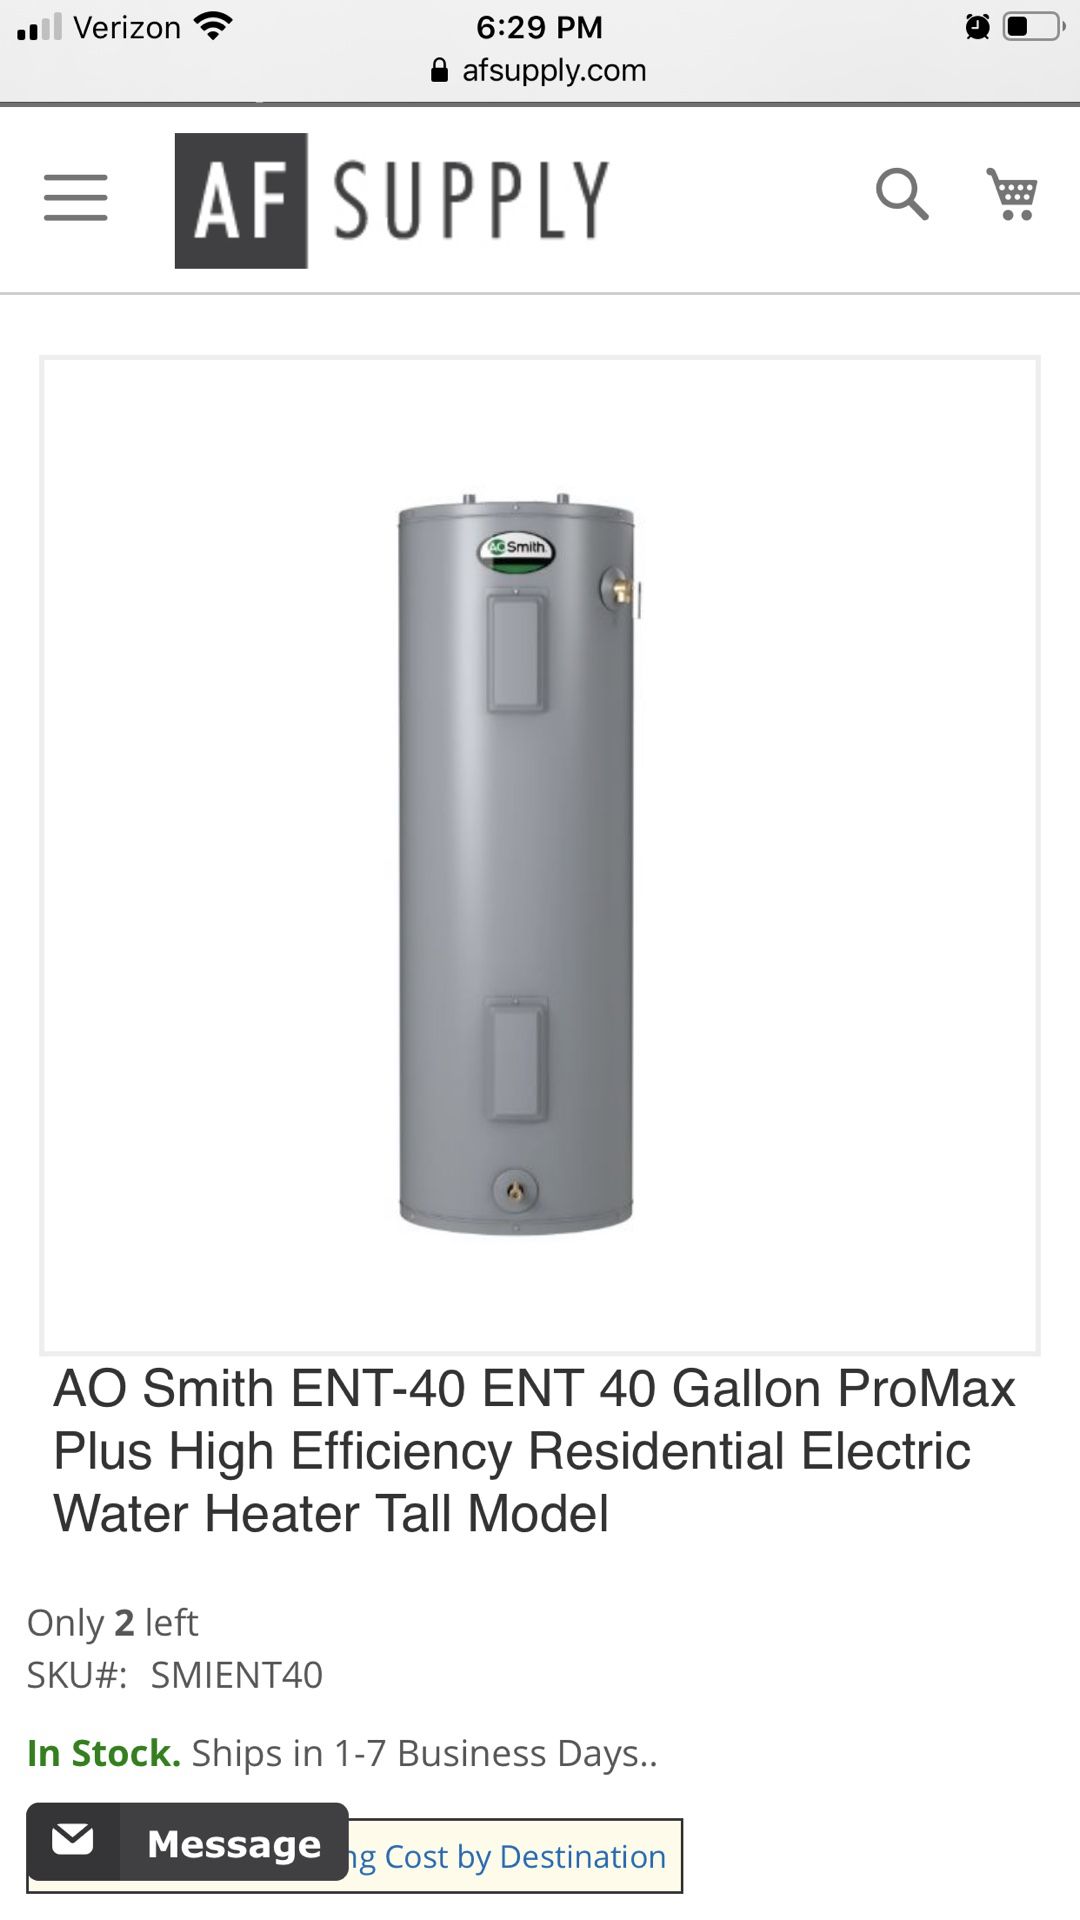 New 40 gal electric water heater